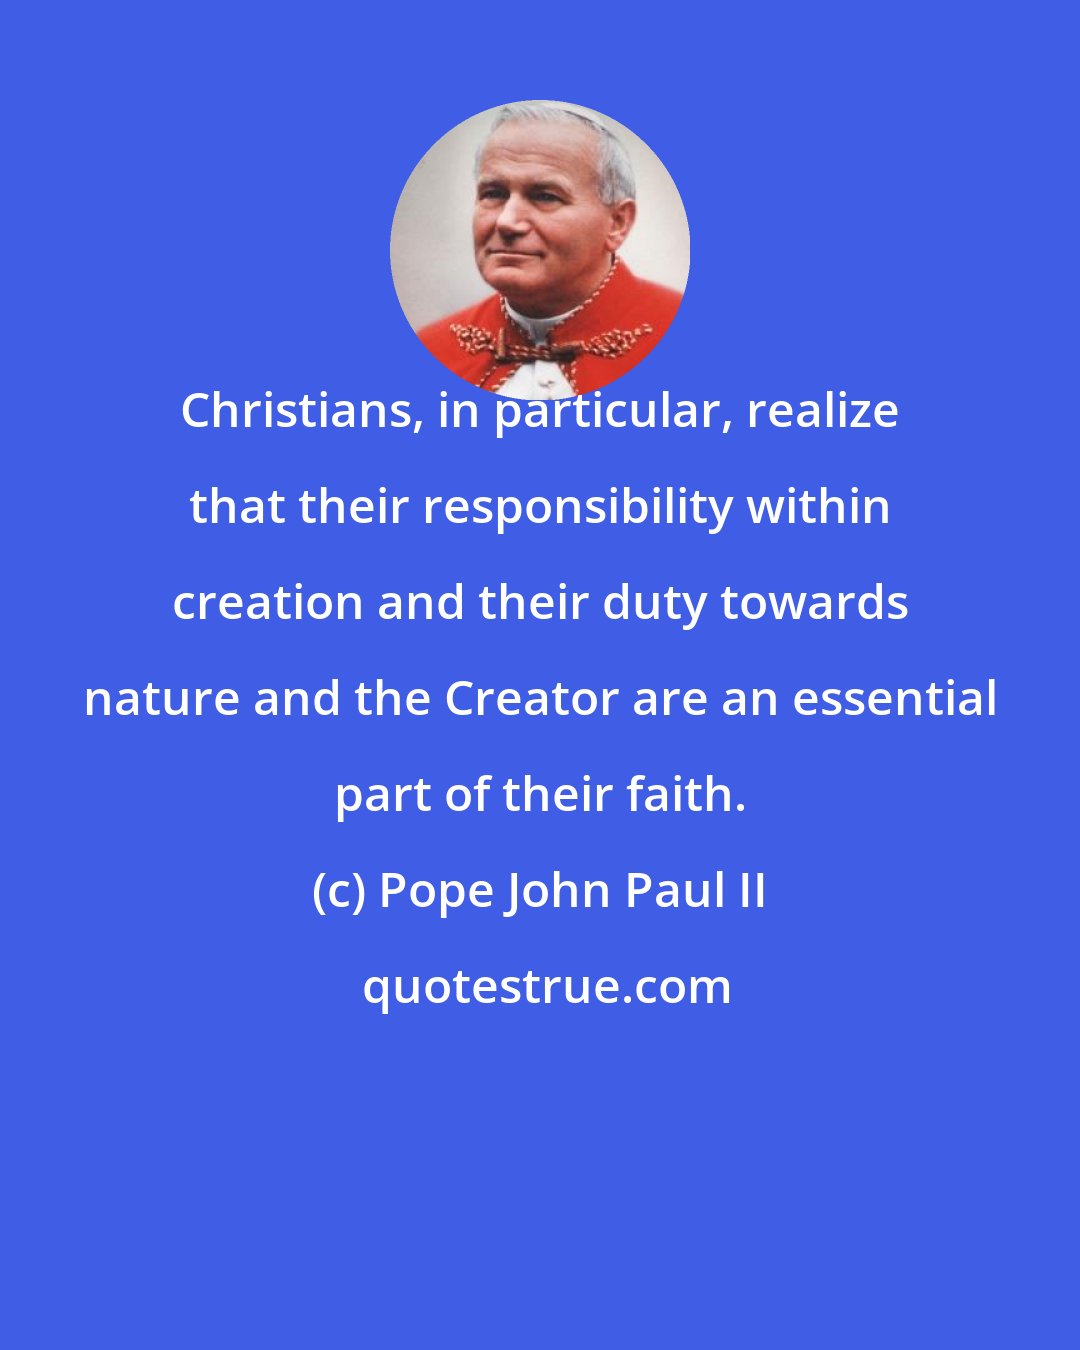 Pope John Paul II: Christians, in particular, realize that their responsibility within creation and their duty towards nature and the Creator are an essential part of their faith.